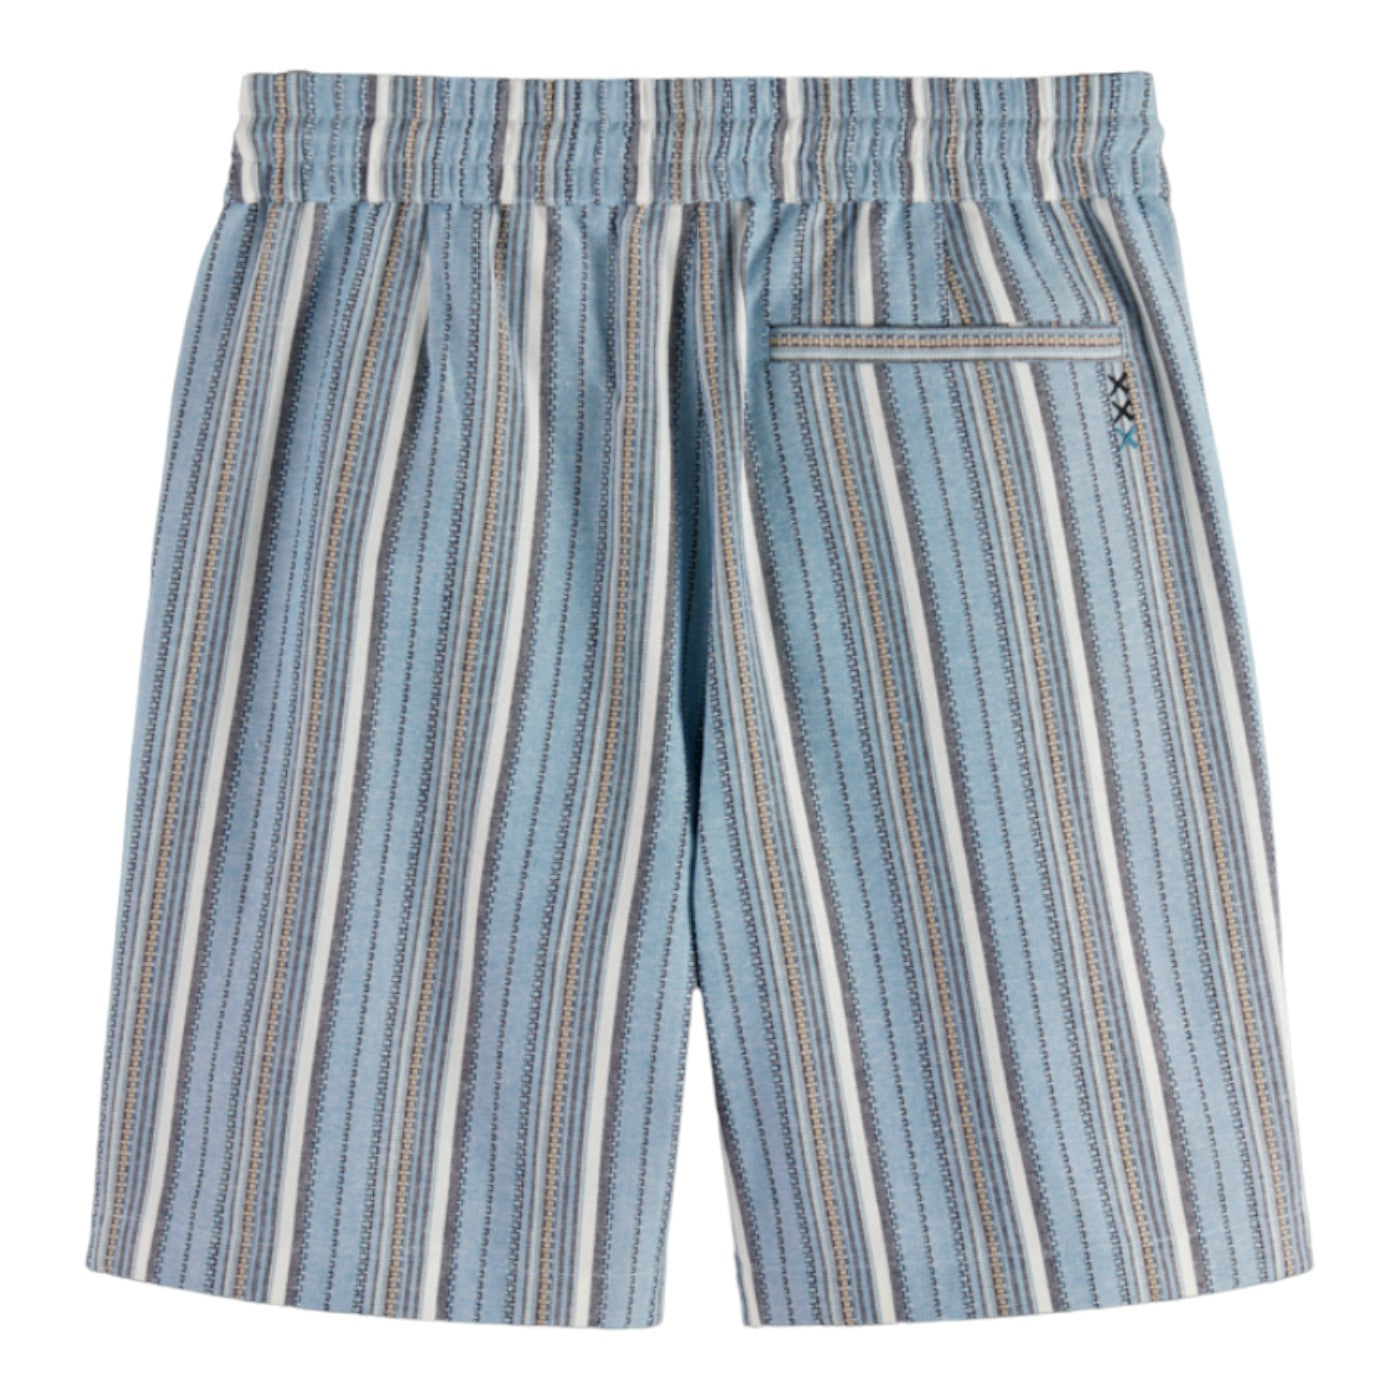 Blue striped shorts with draw string and back pocket 